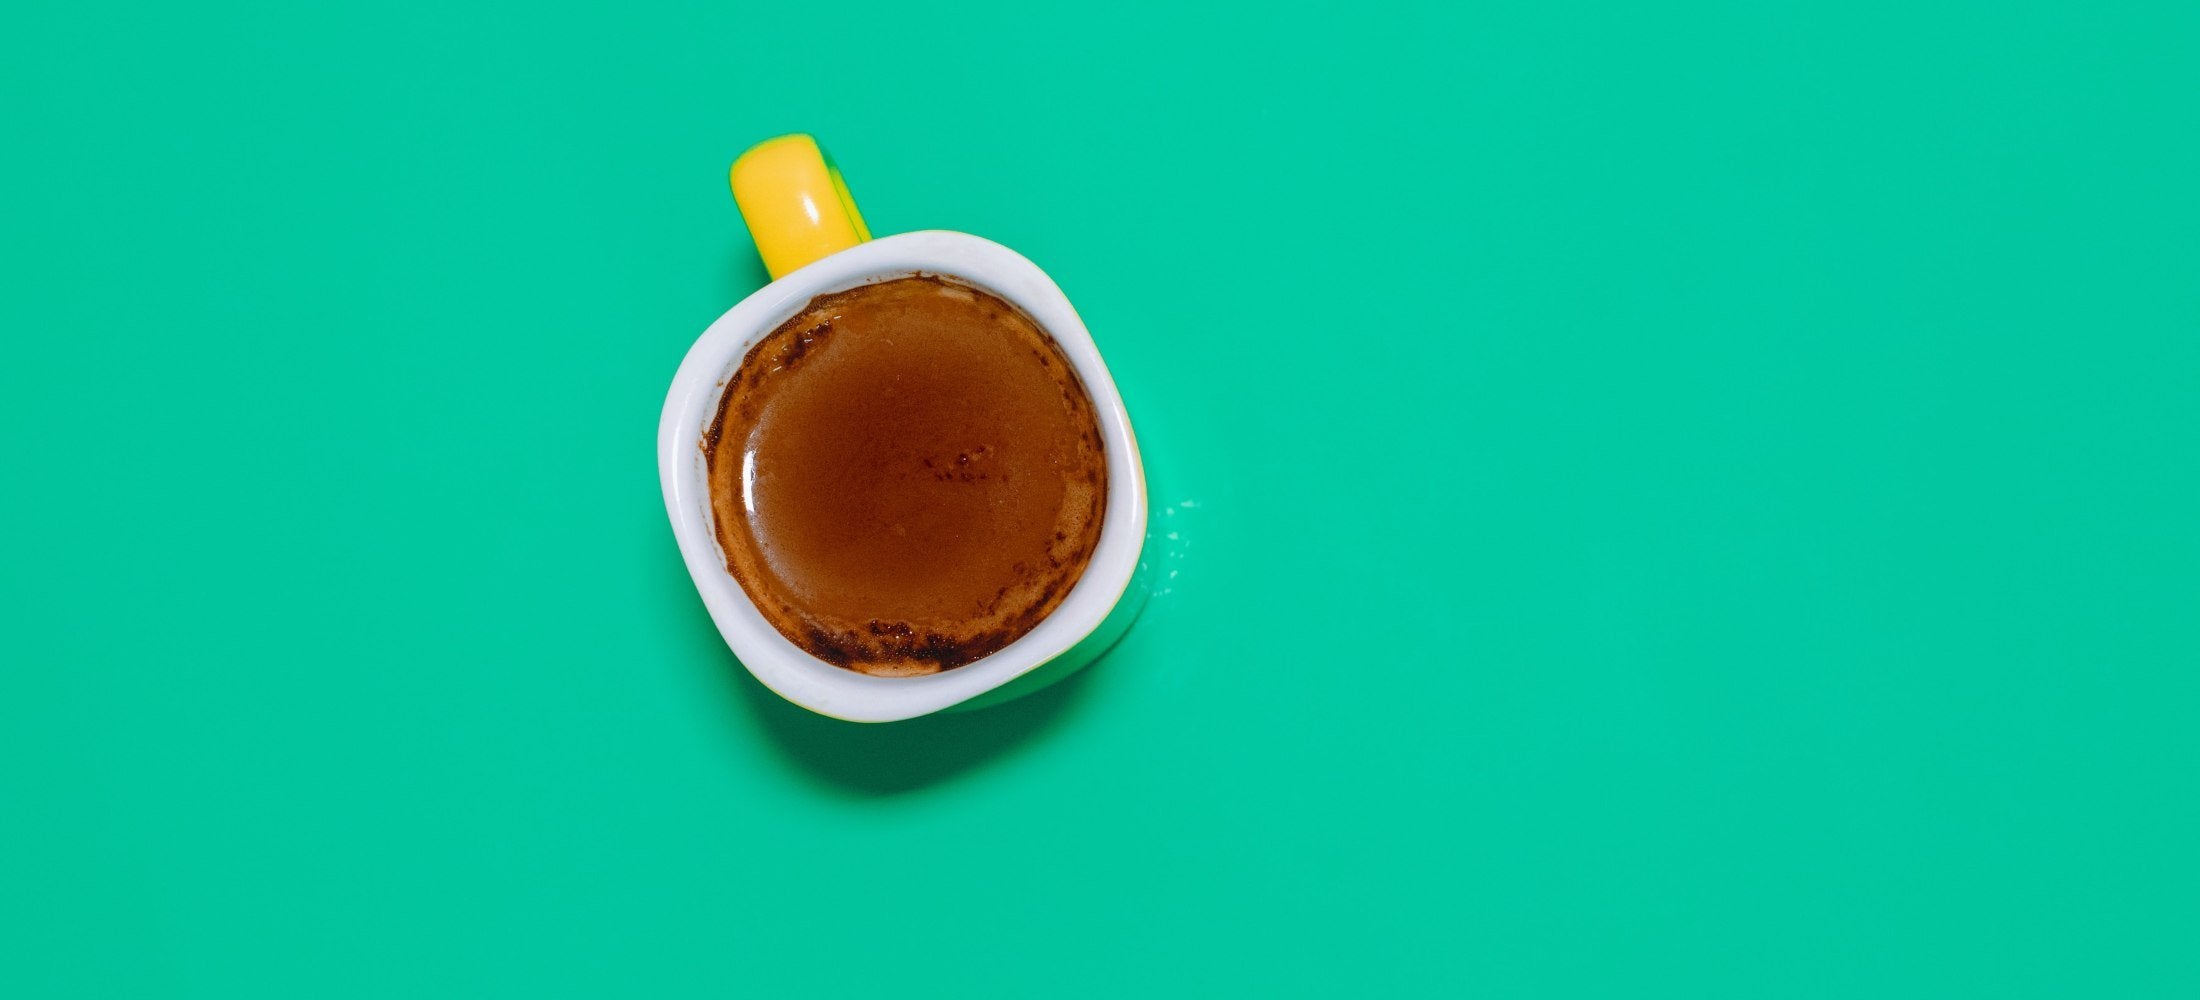 What Is CBD And Why Are People Putting It in Coffee?